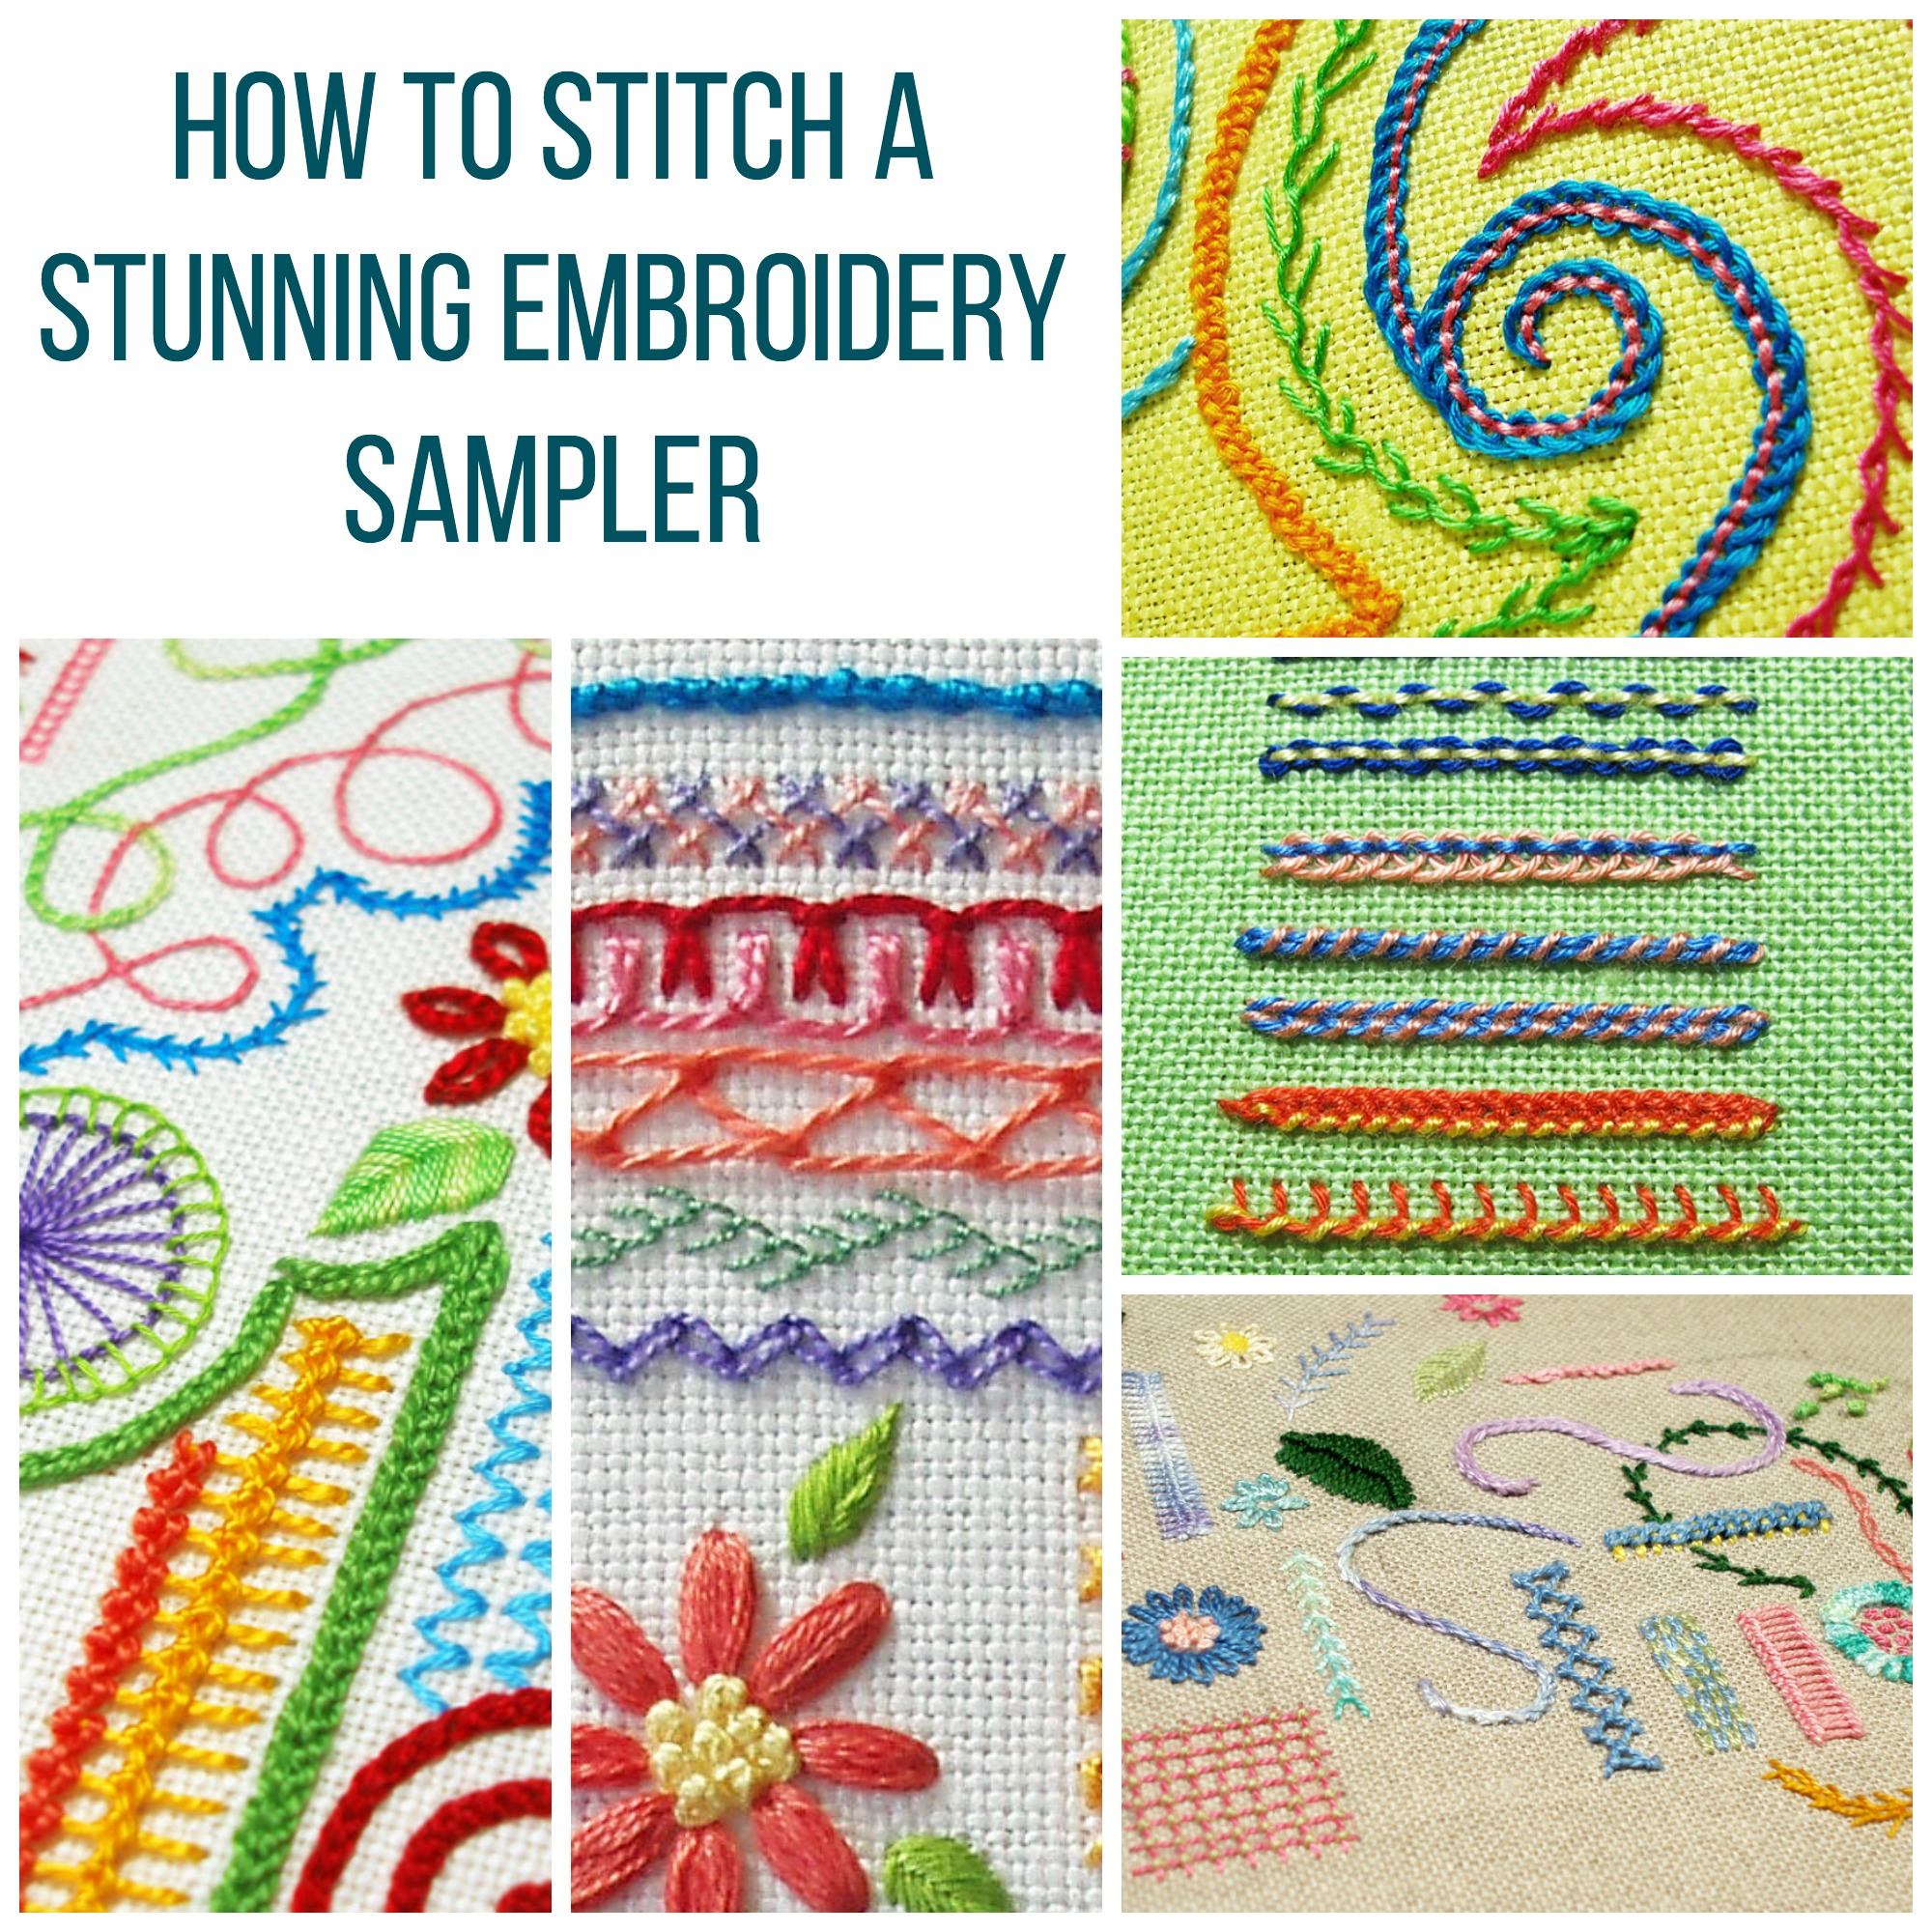 Embroidery Sampler Patterns Free Show Off Your Stitching With A Stunning Embroidery Sampler